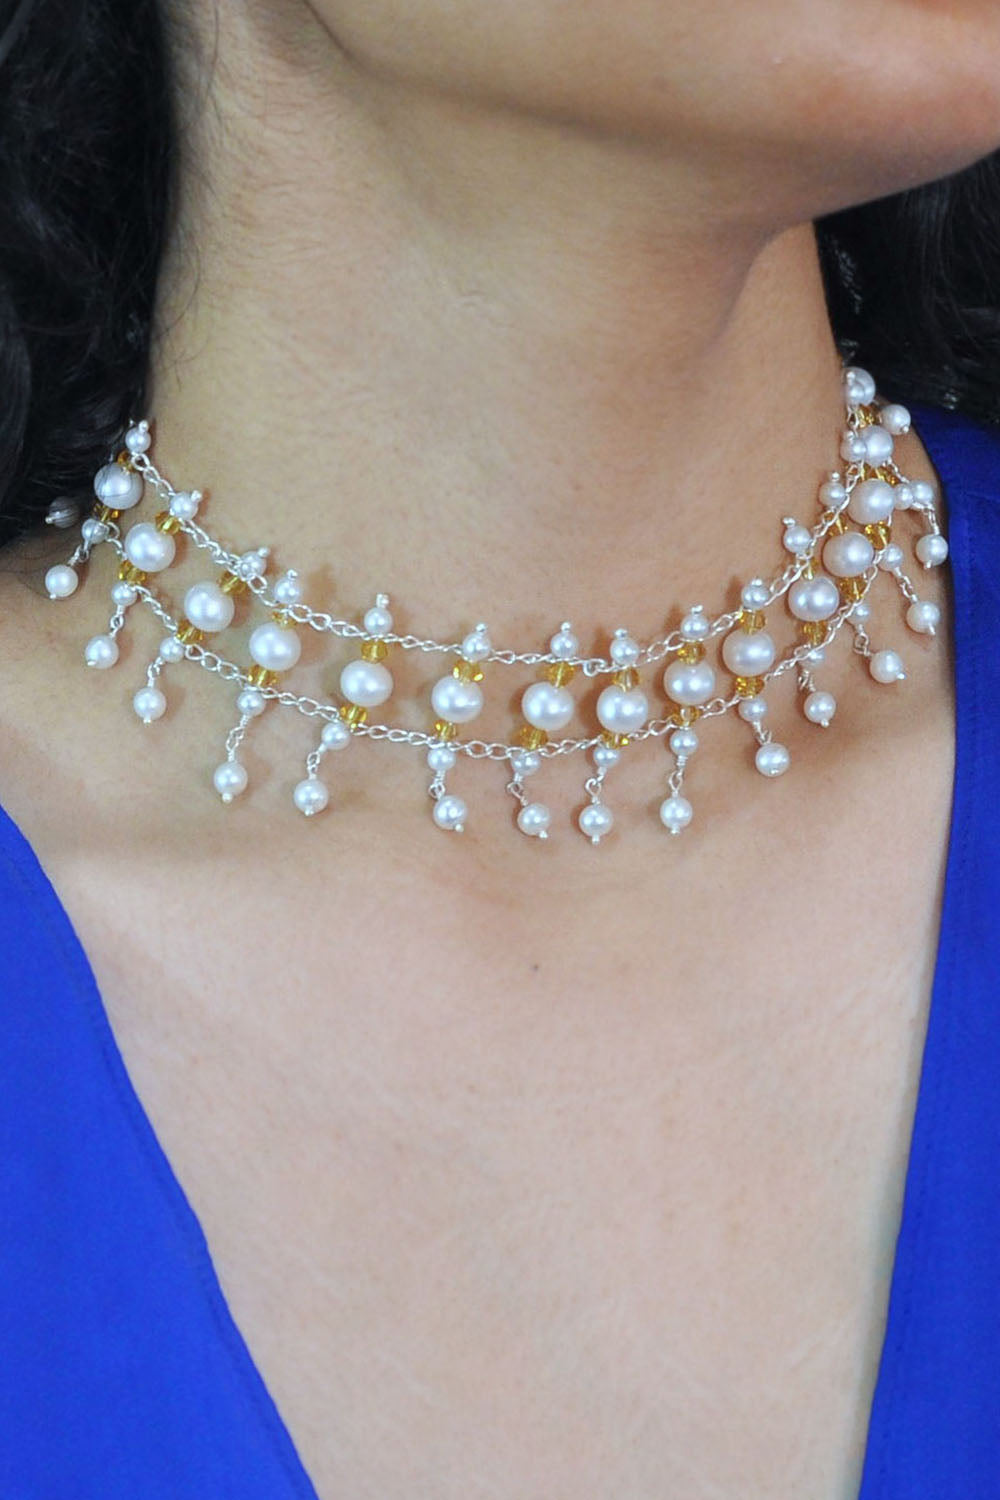 Symphony Pearls with Crystals Choker Necklace Sterling Silver